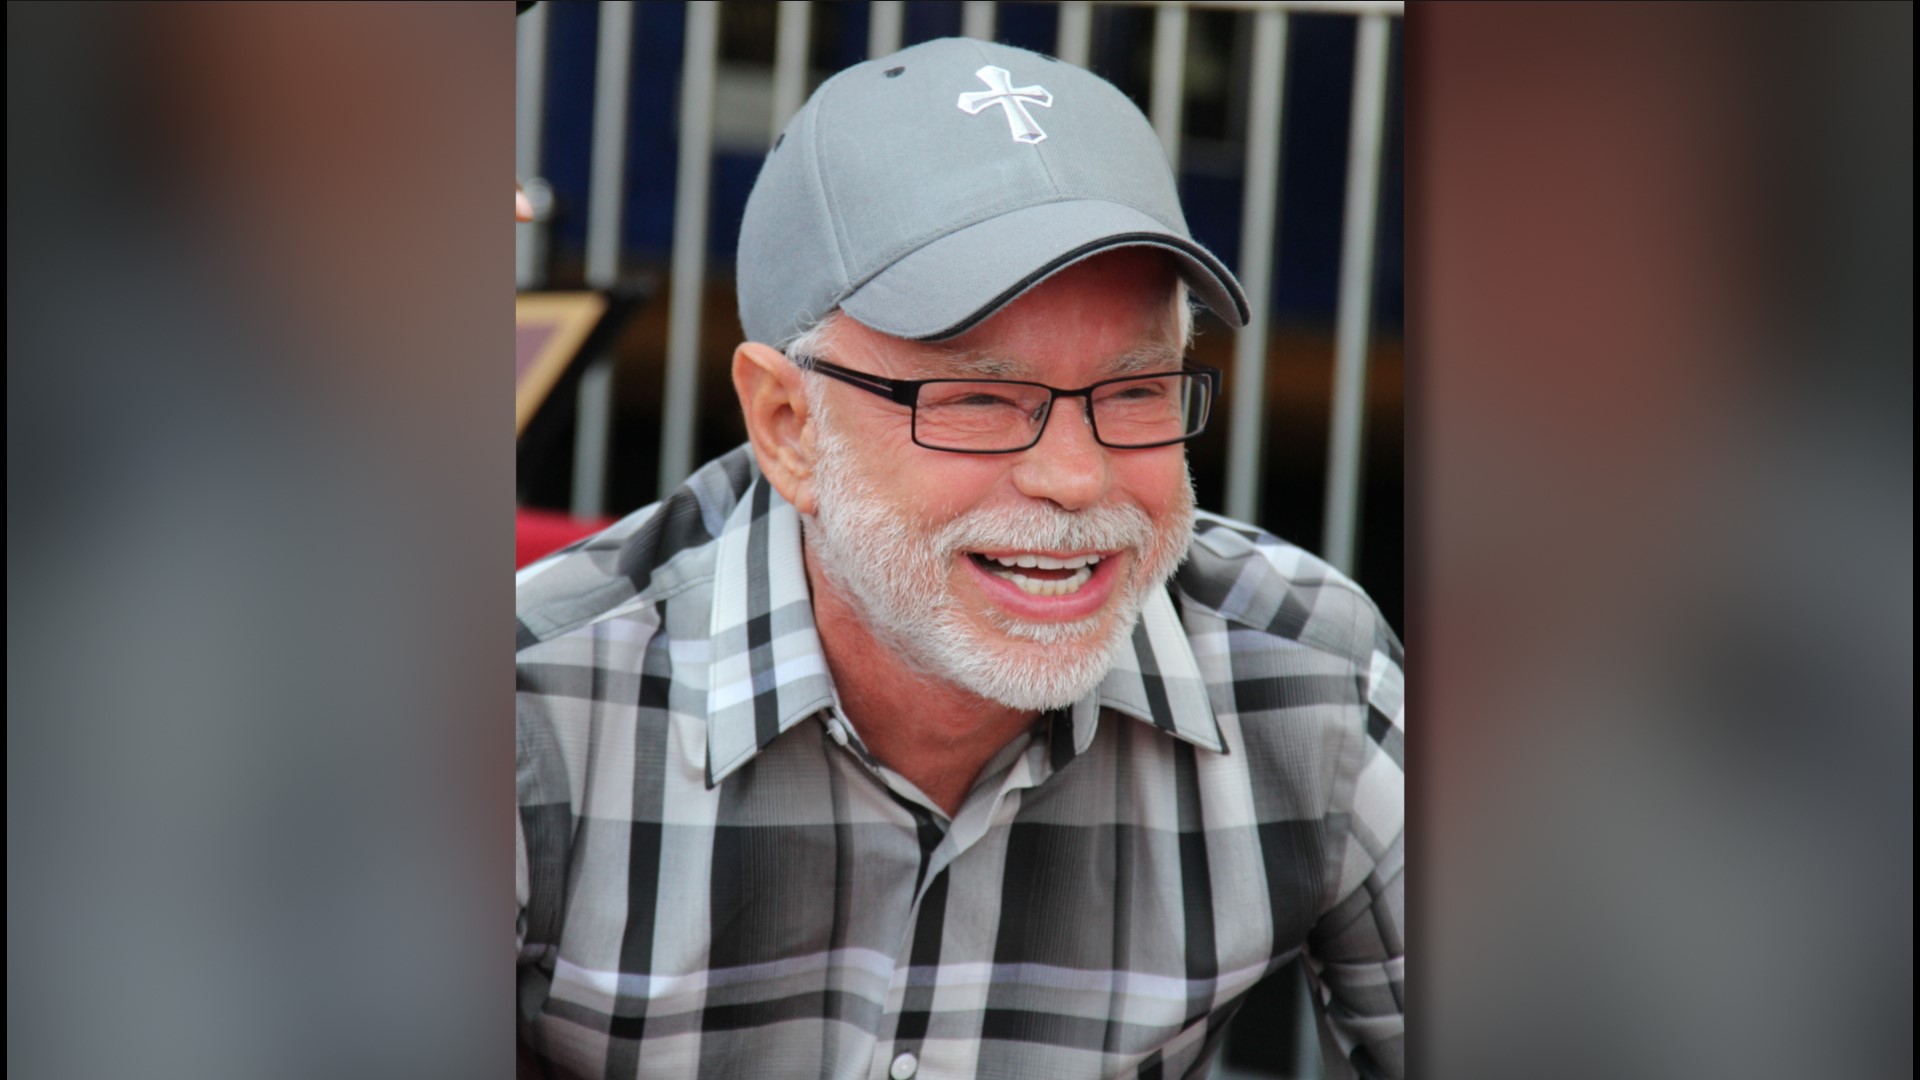 Jim Bakker faces a lawsuit after the televangelist offered products on his show and website that claimed to cure the coronavirus. Veuer's Justin Kircher has the story.